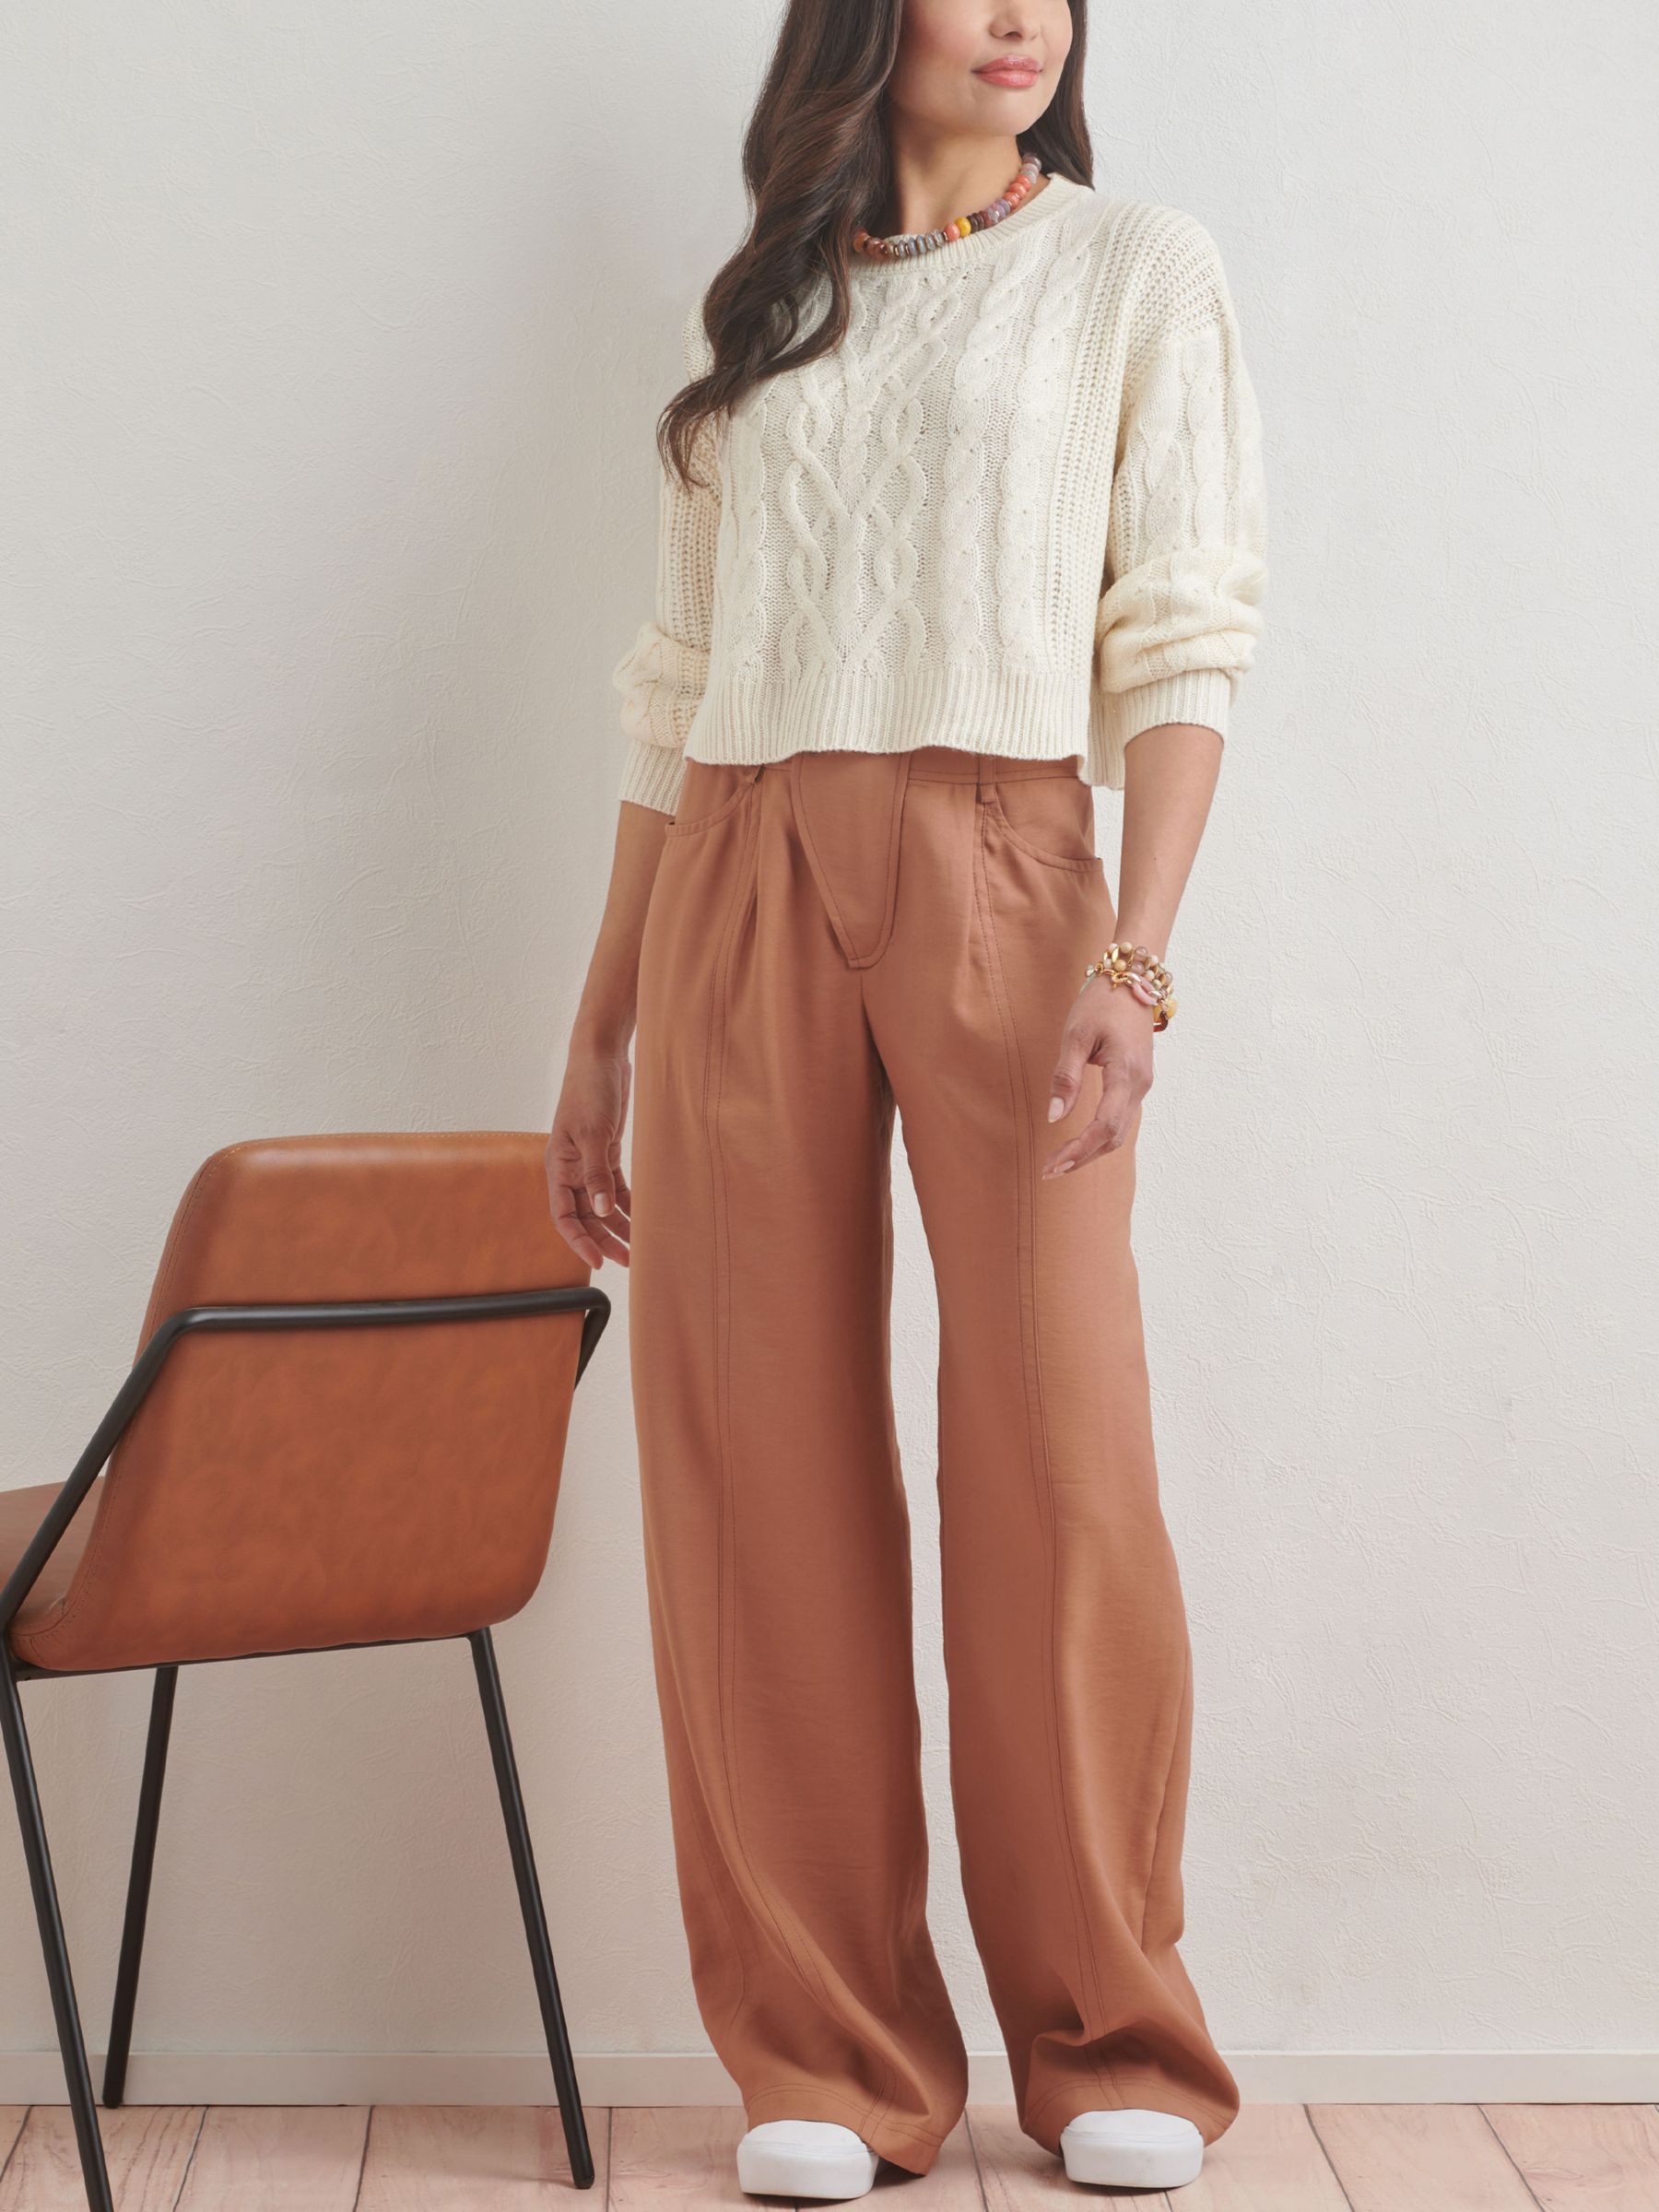 S9827, Women's Pants in Two Lengths, Camisole and Cardigan